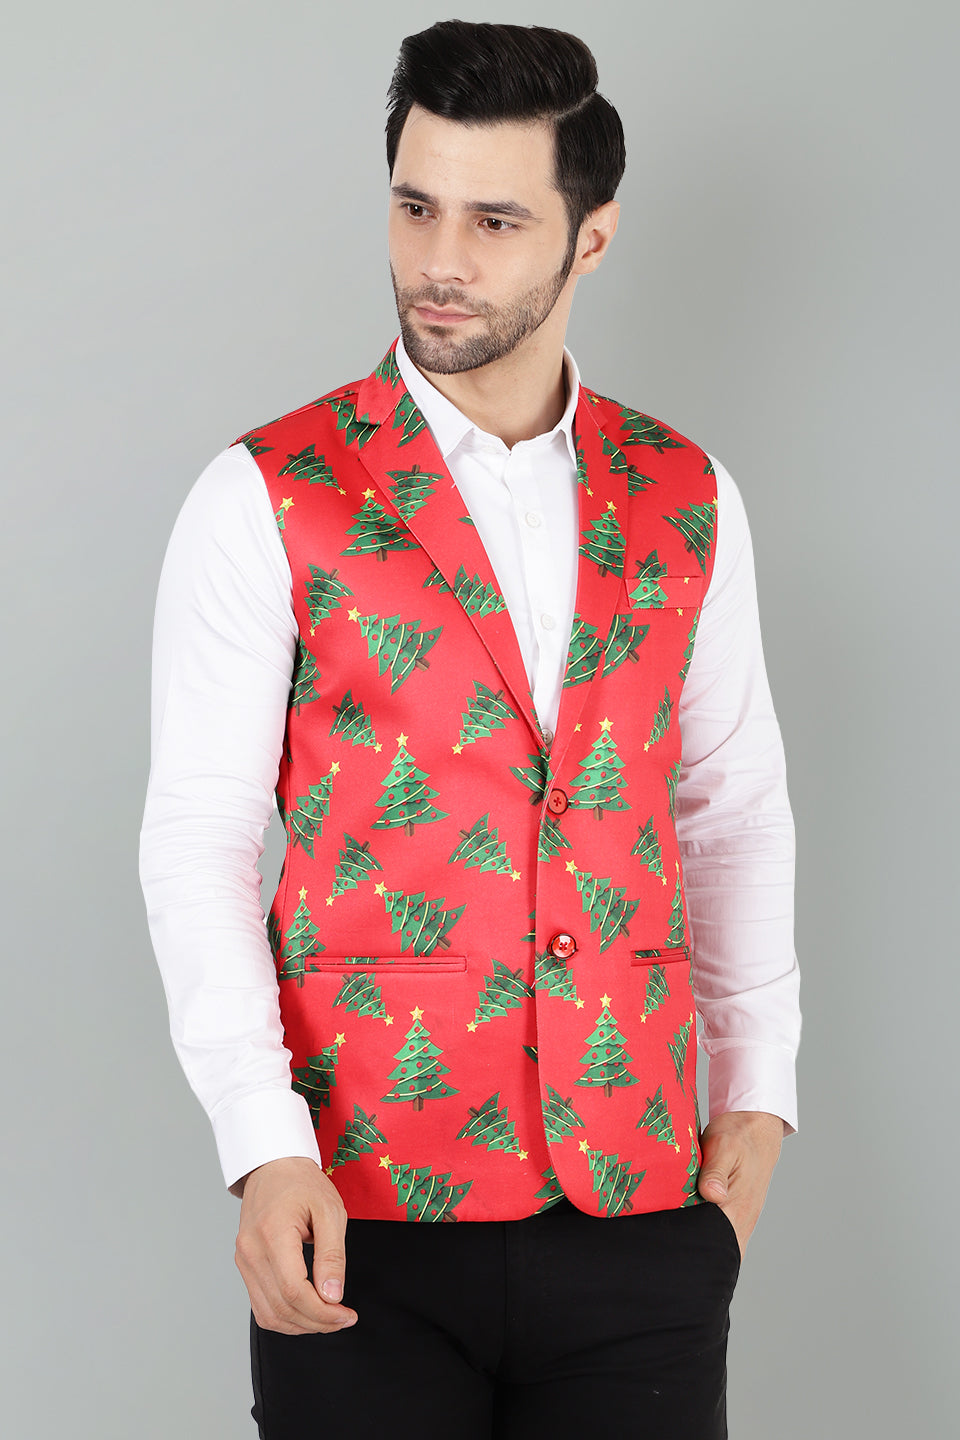 Polyester Cotton Christmas Red Jacket Vest Waistcoat